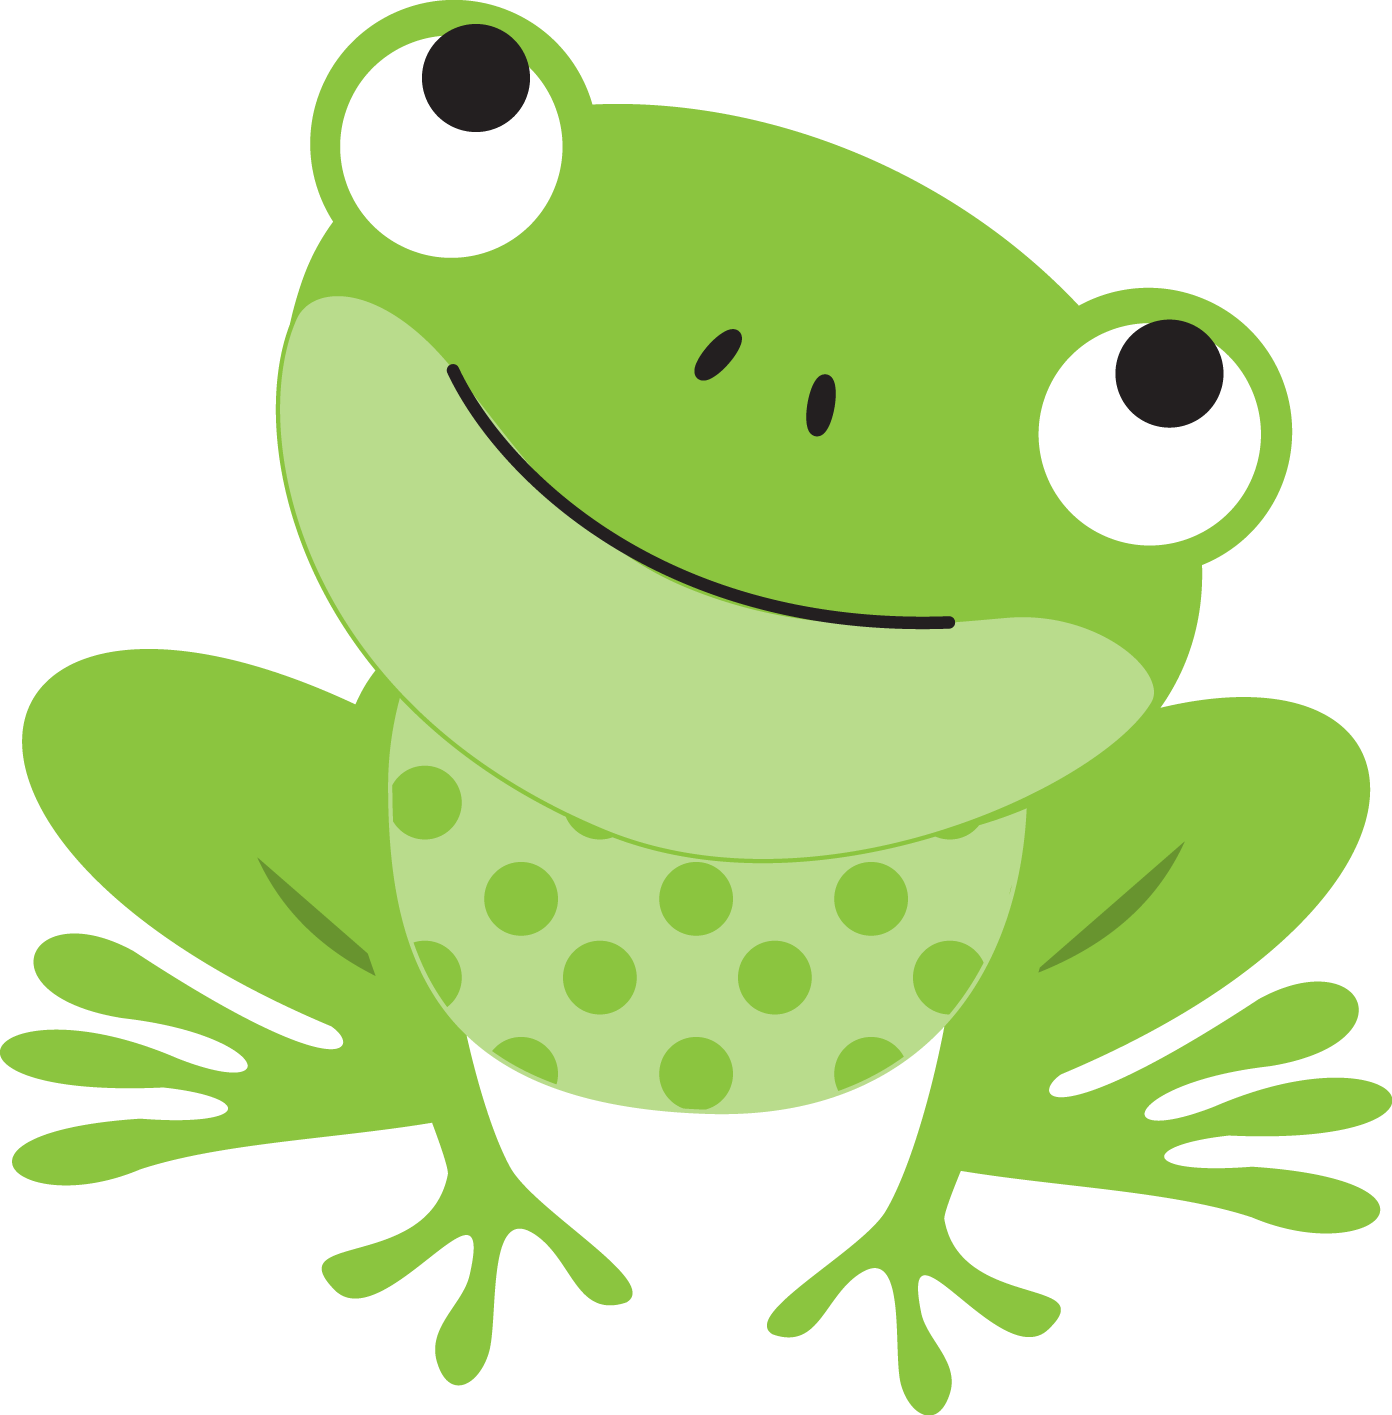 Cute Baby Frog PNG Transparent Cute Baby Frog.PNG Images. | PlusPNG